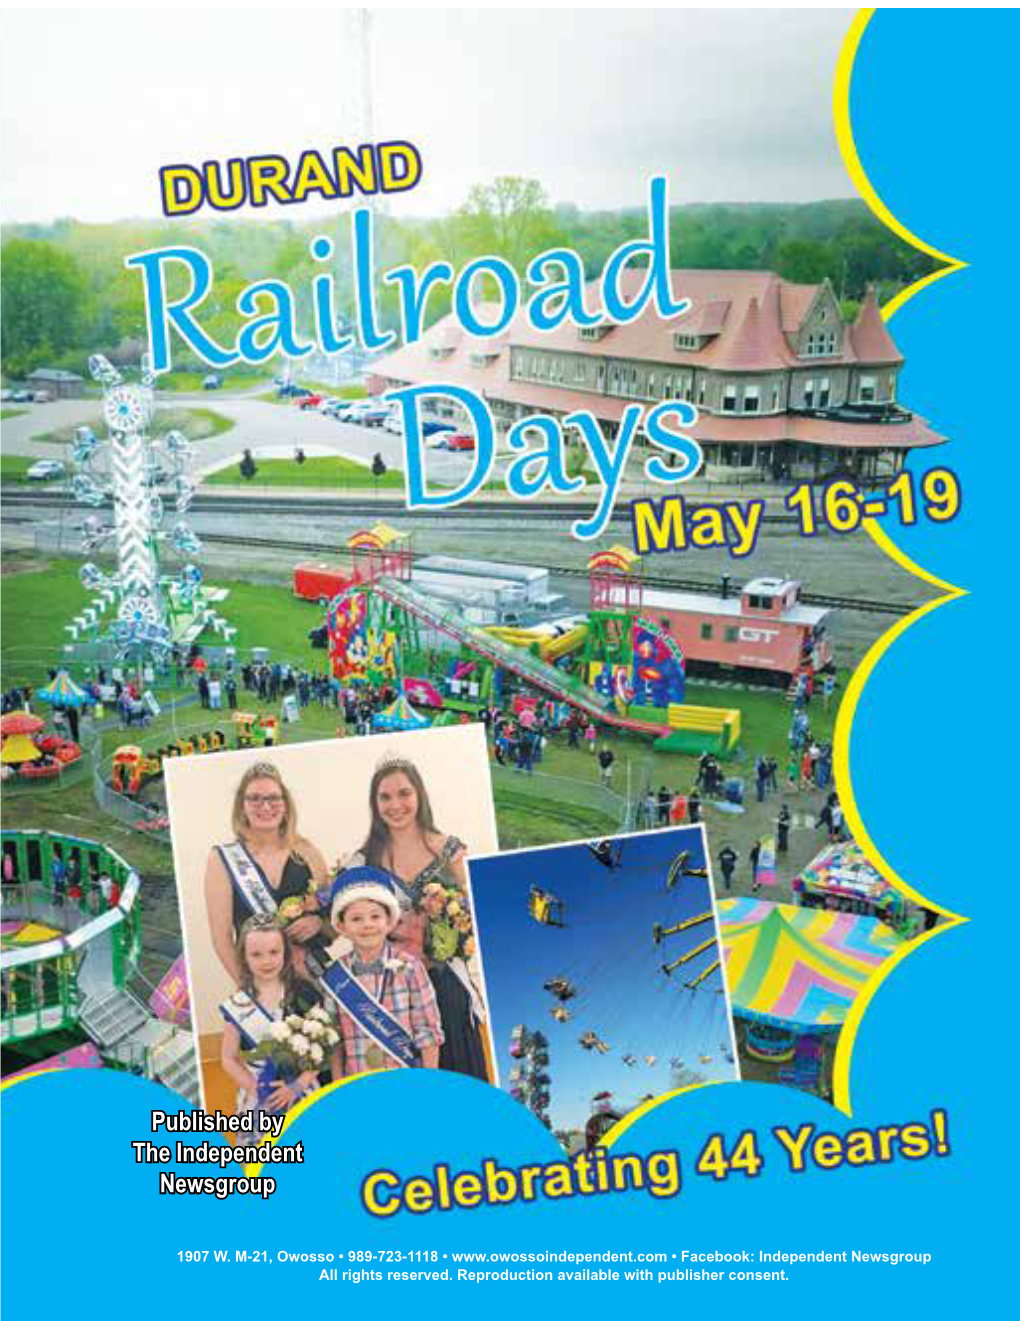 Durand Railroad Days Schedule of Events THURSDAY, May 16, 2019 5 P.M.-Closing Carnival Rides by Big Rock Amusements Sponsored 6 A.M.-8 A.M